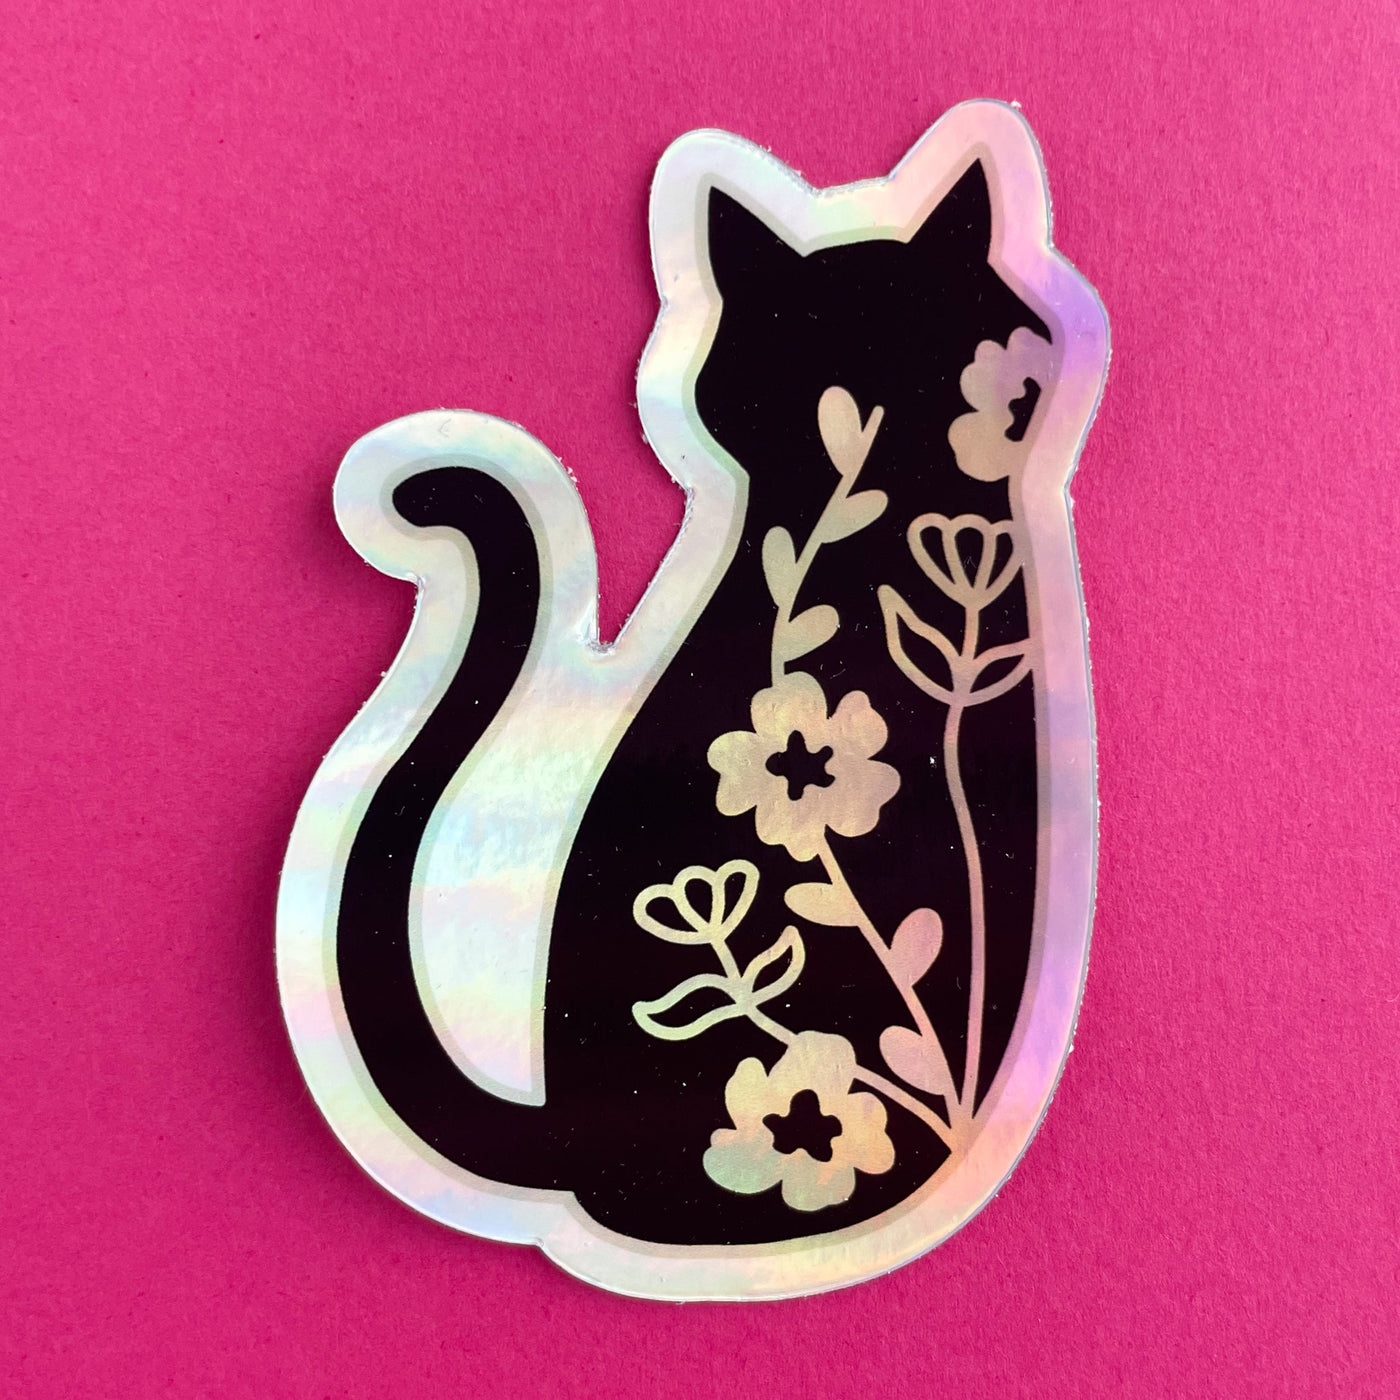 A holographic sticker in the shape of a silhouette of a black cat. There are floral vines along the back of the cat. The sticker is on a hot pink background.